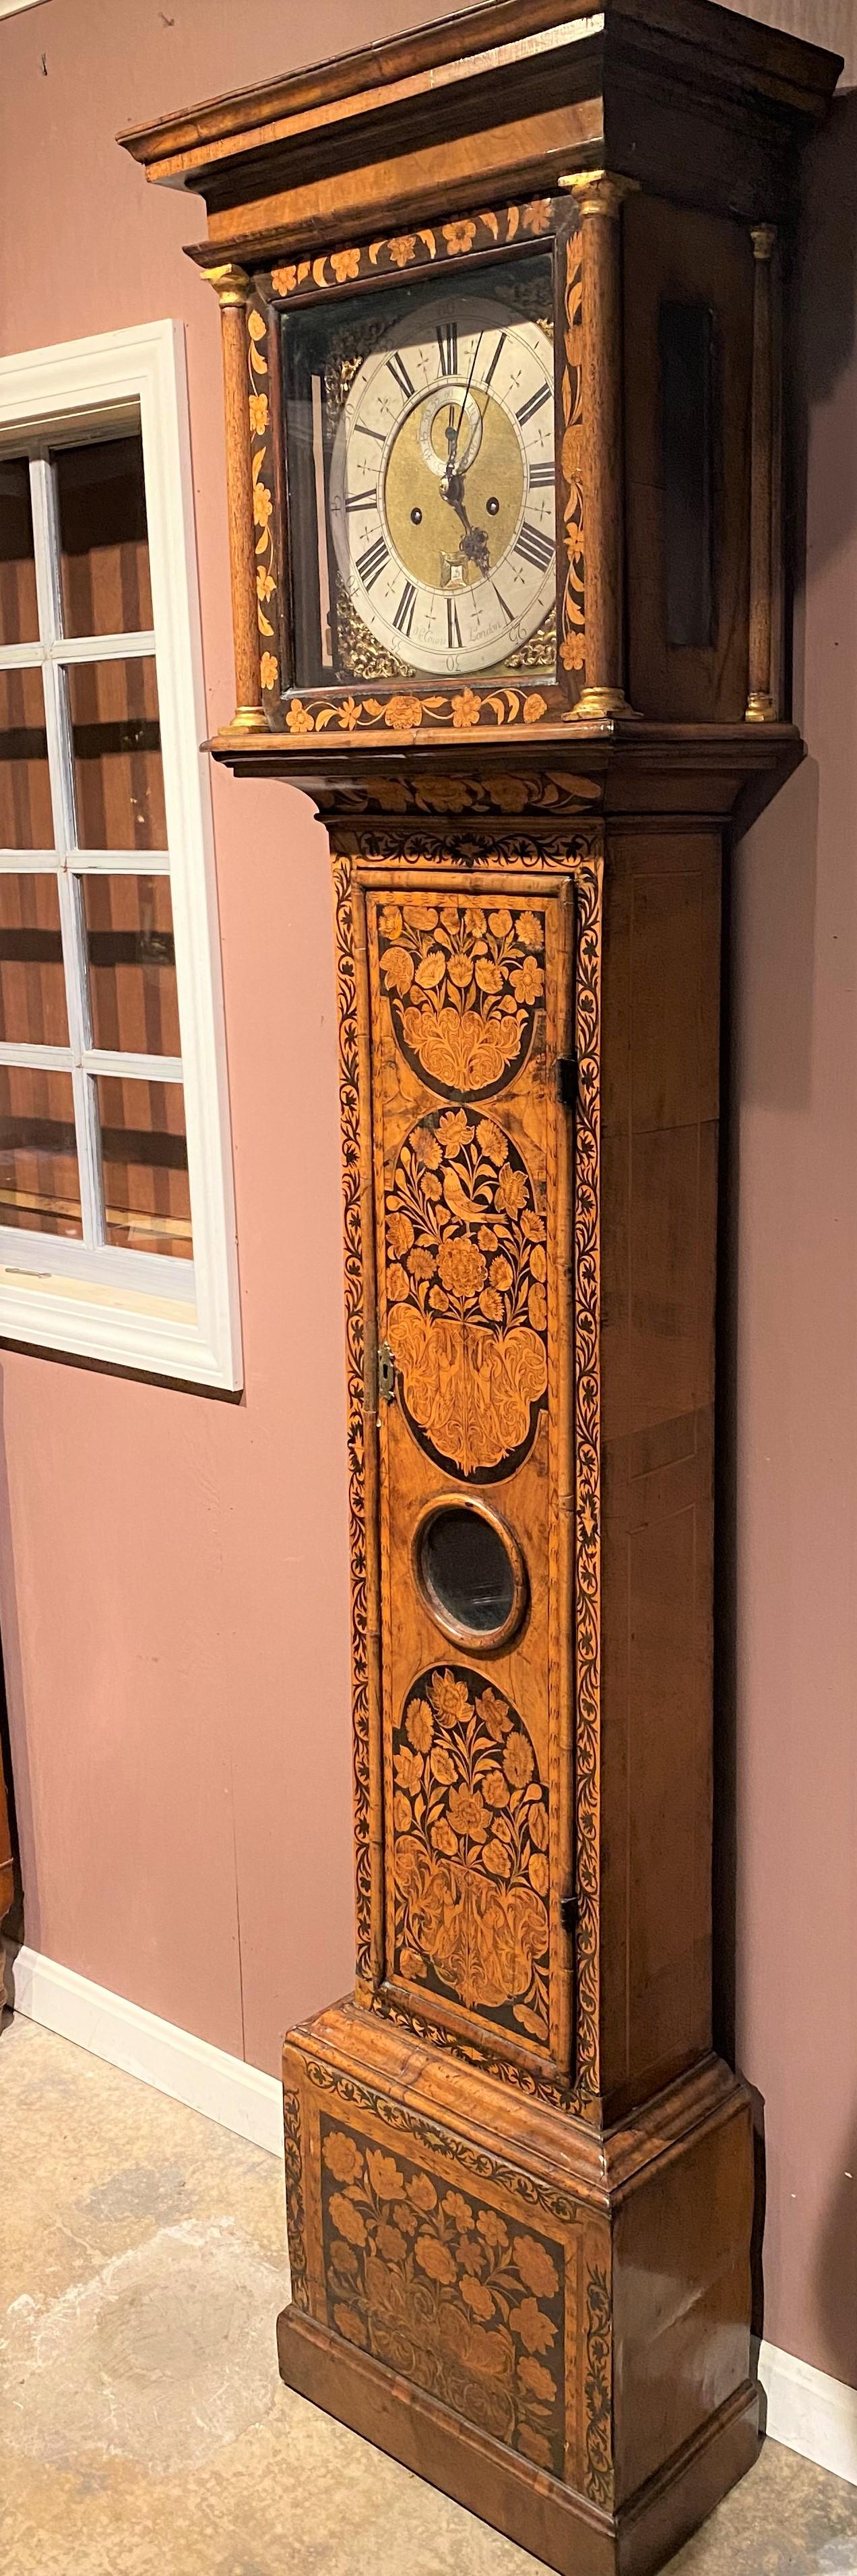 English William & Mary Floral Marquetry 8-Day Longcase Clock by LeCount 'LeCompte' For Sale